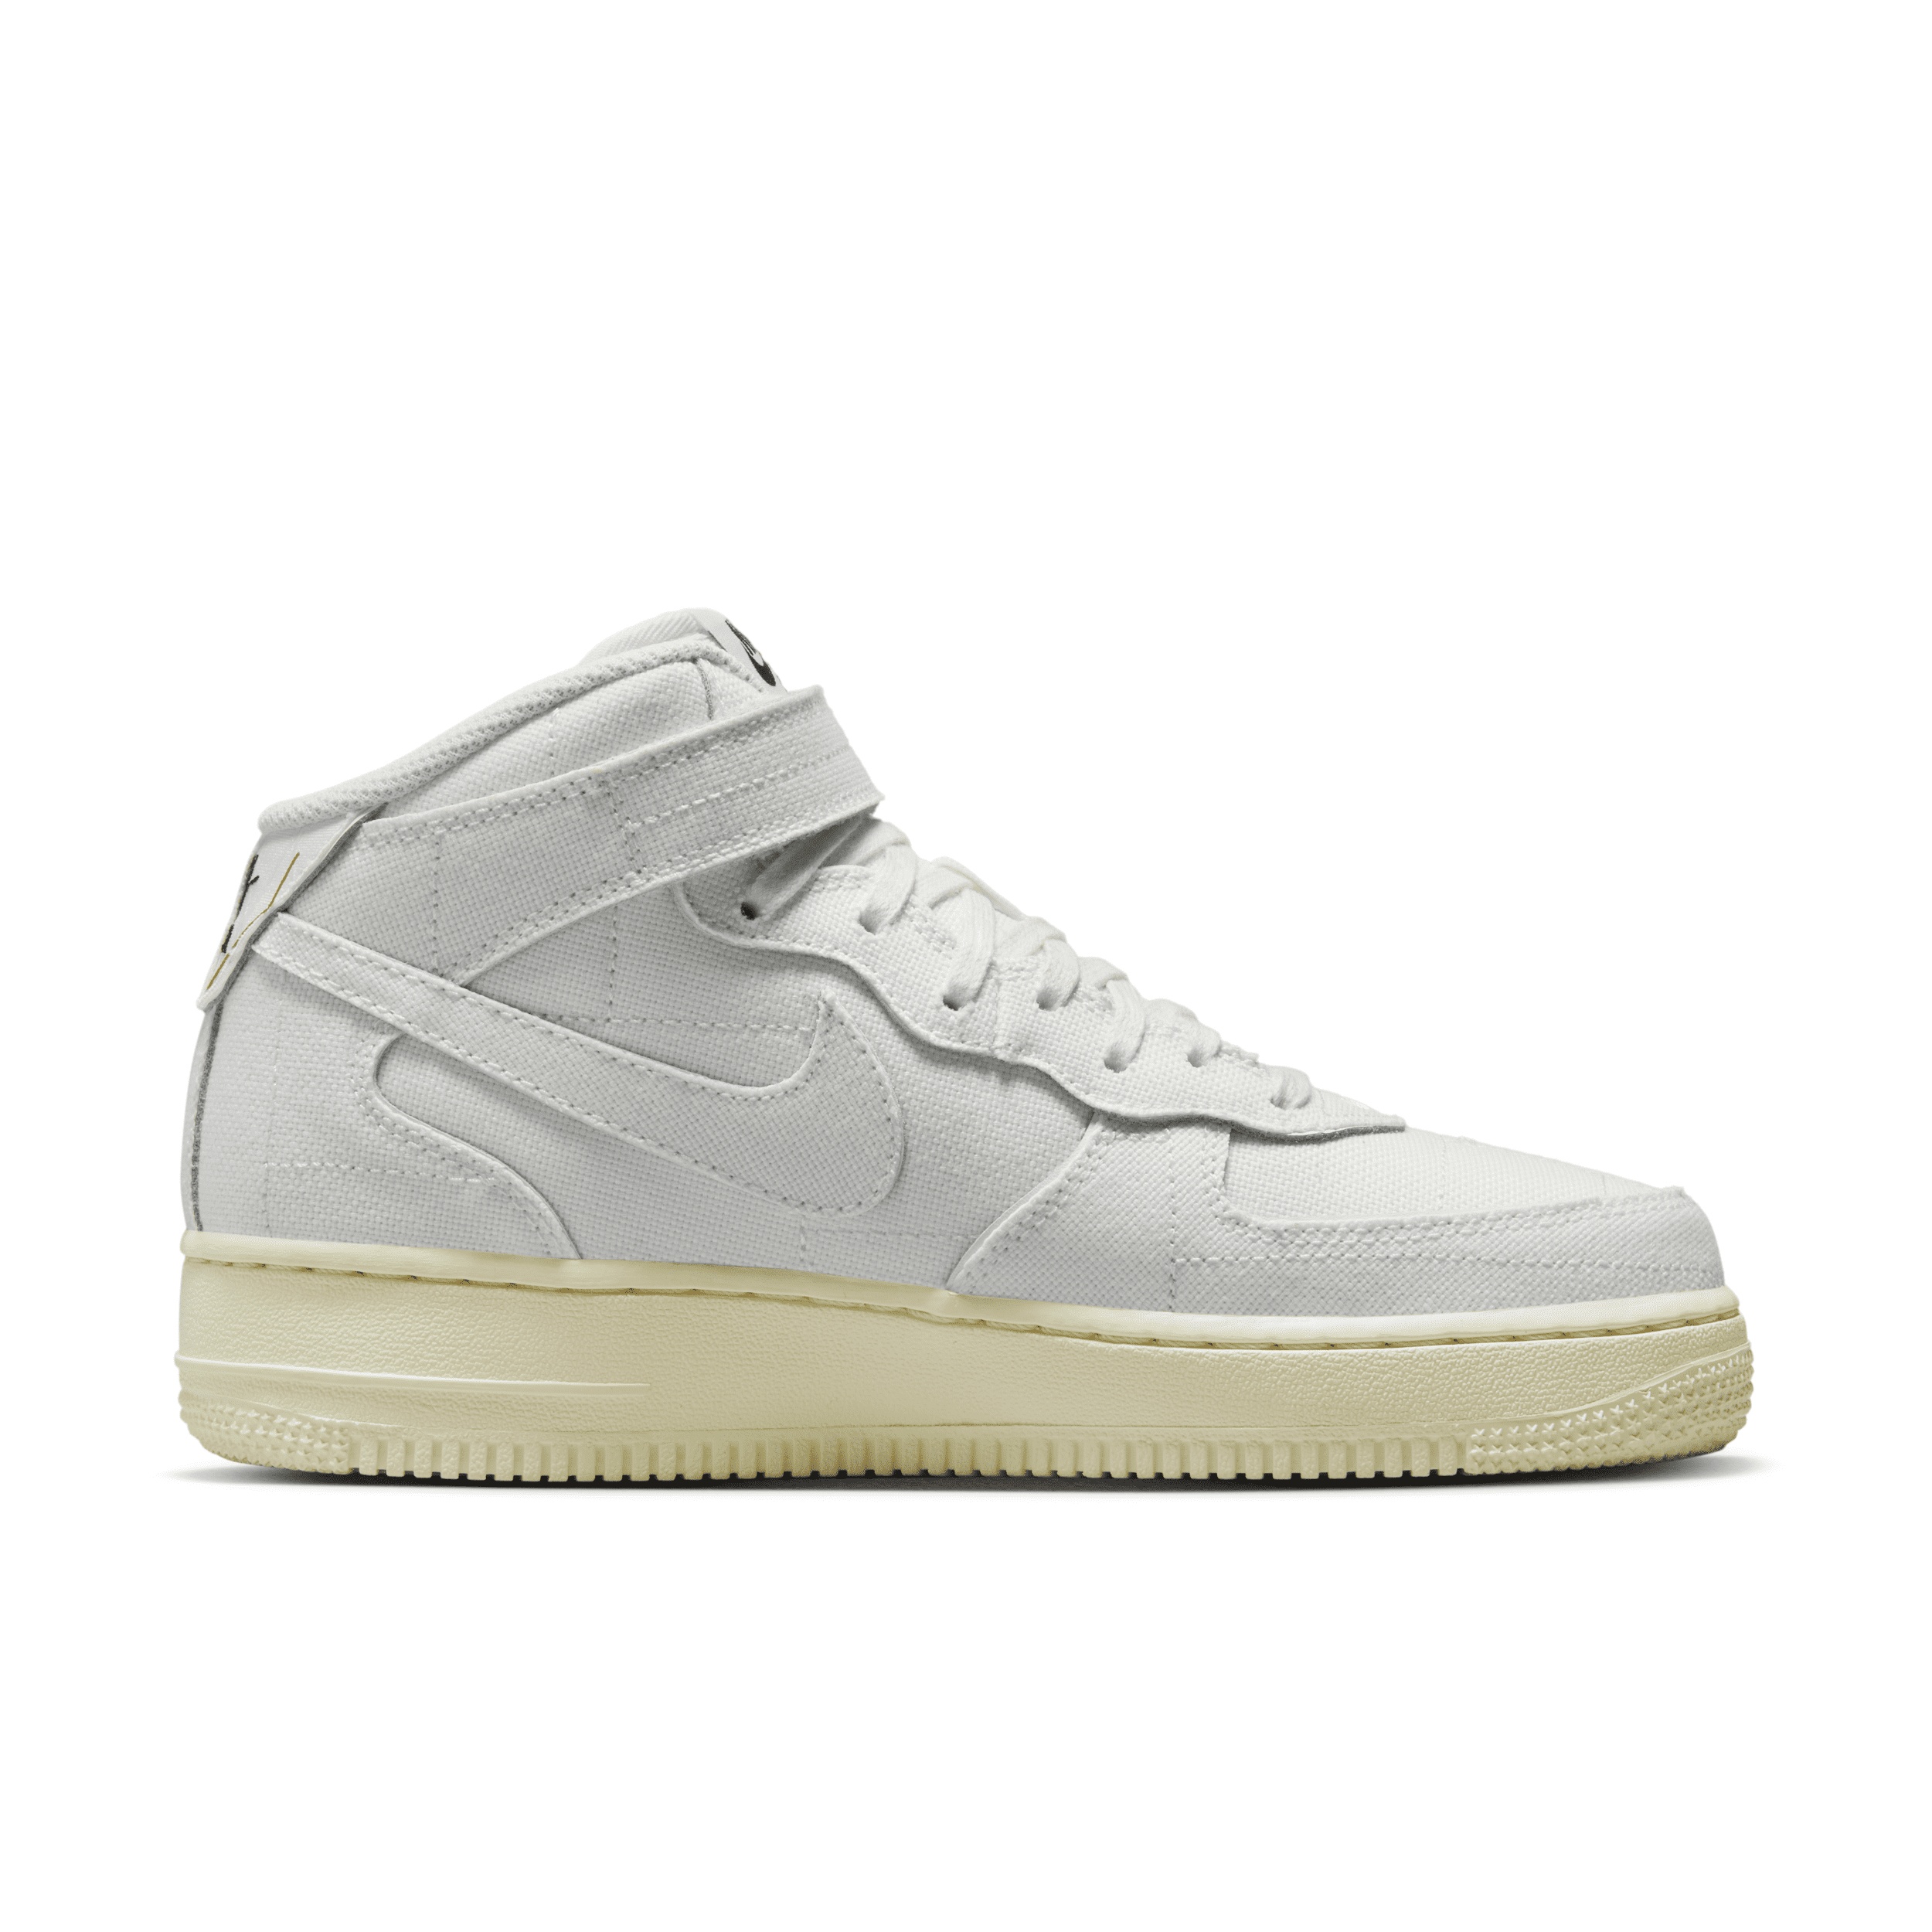 Nike Women's Air Force 1 '07 Mid LX Shoes - 3